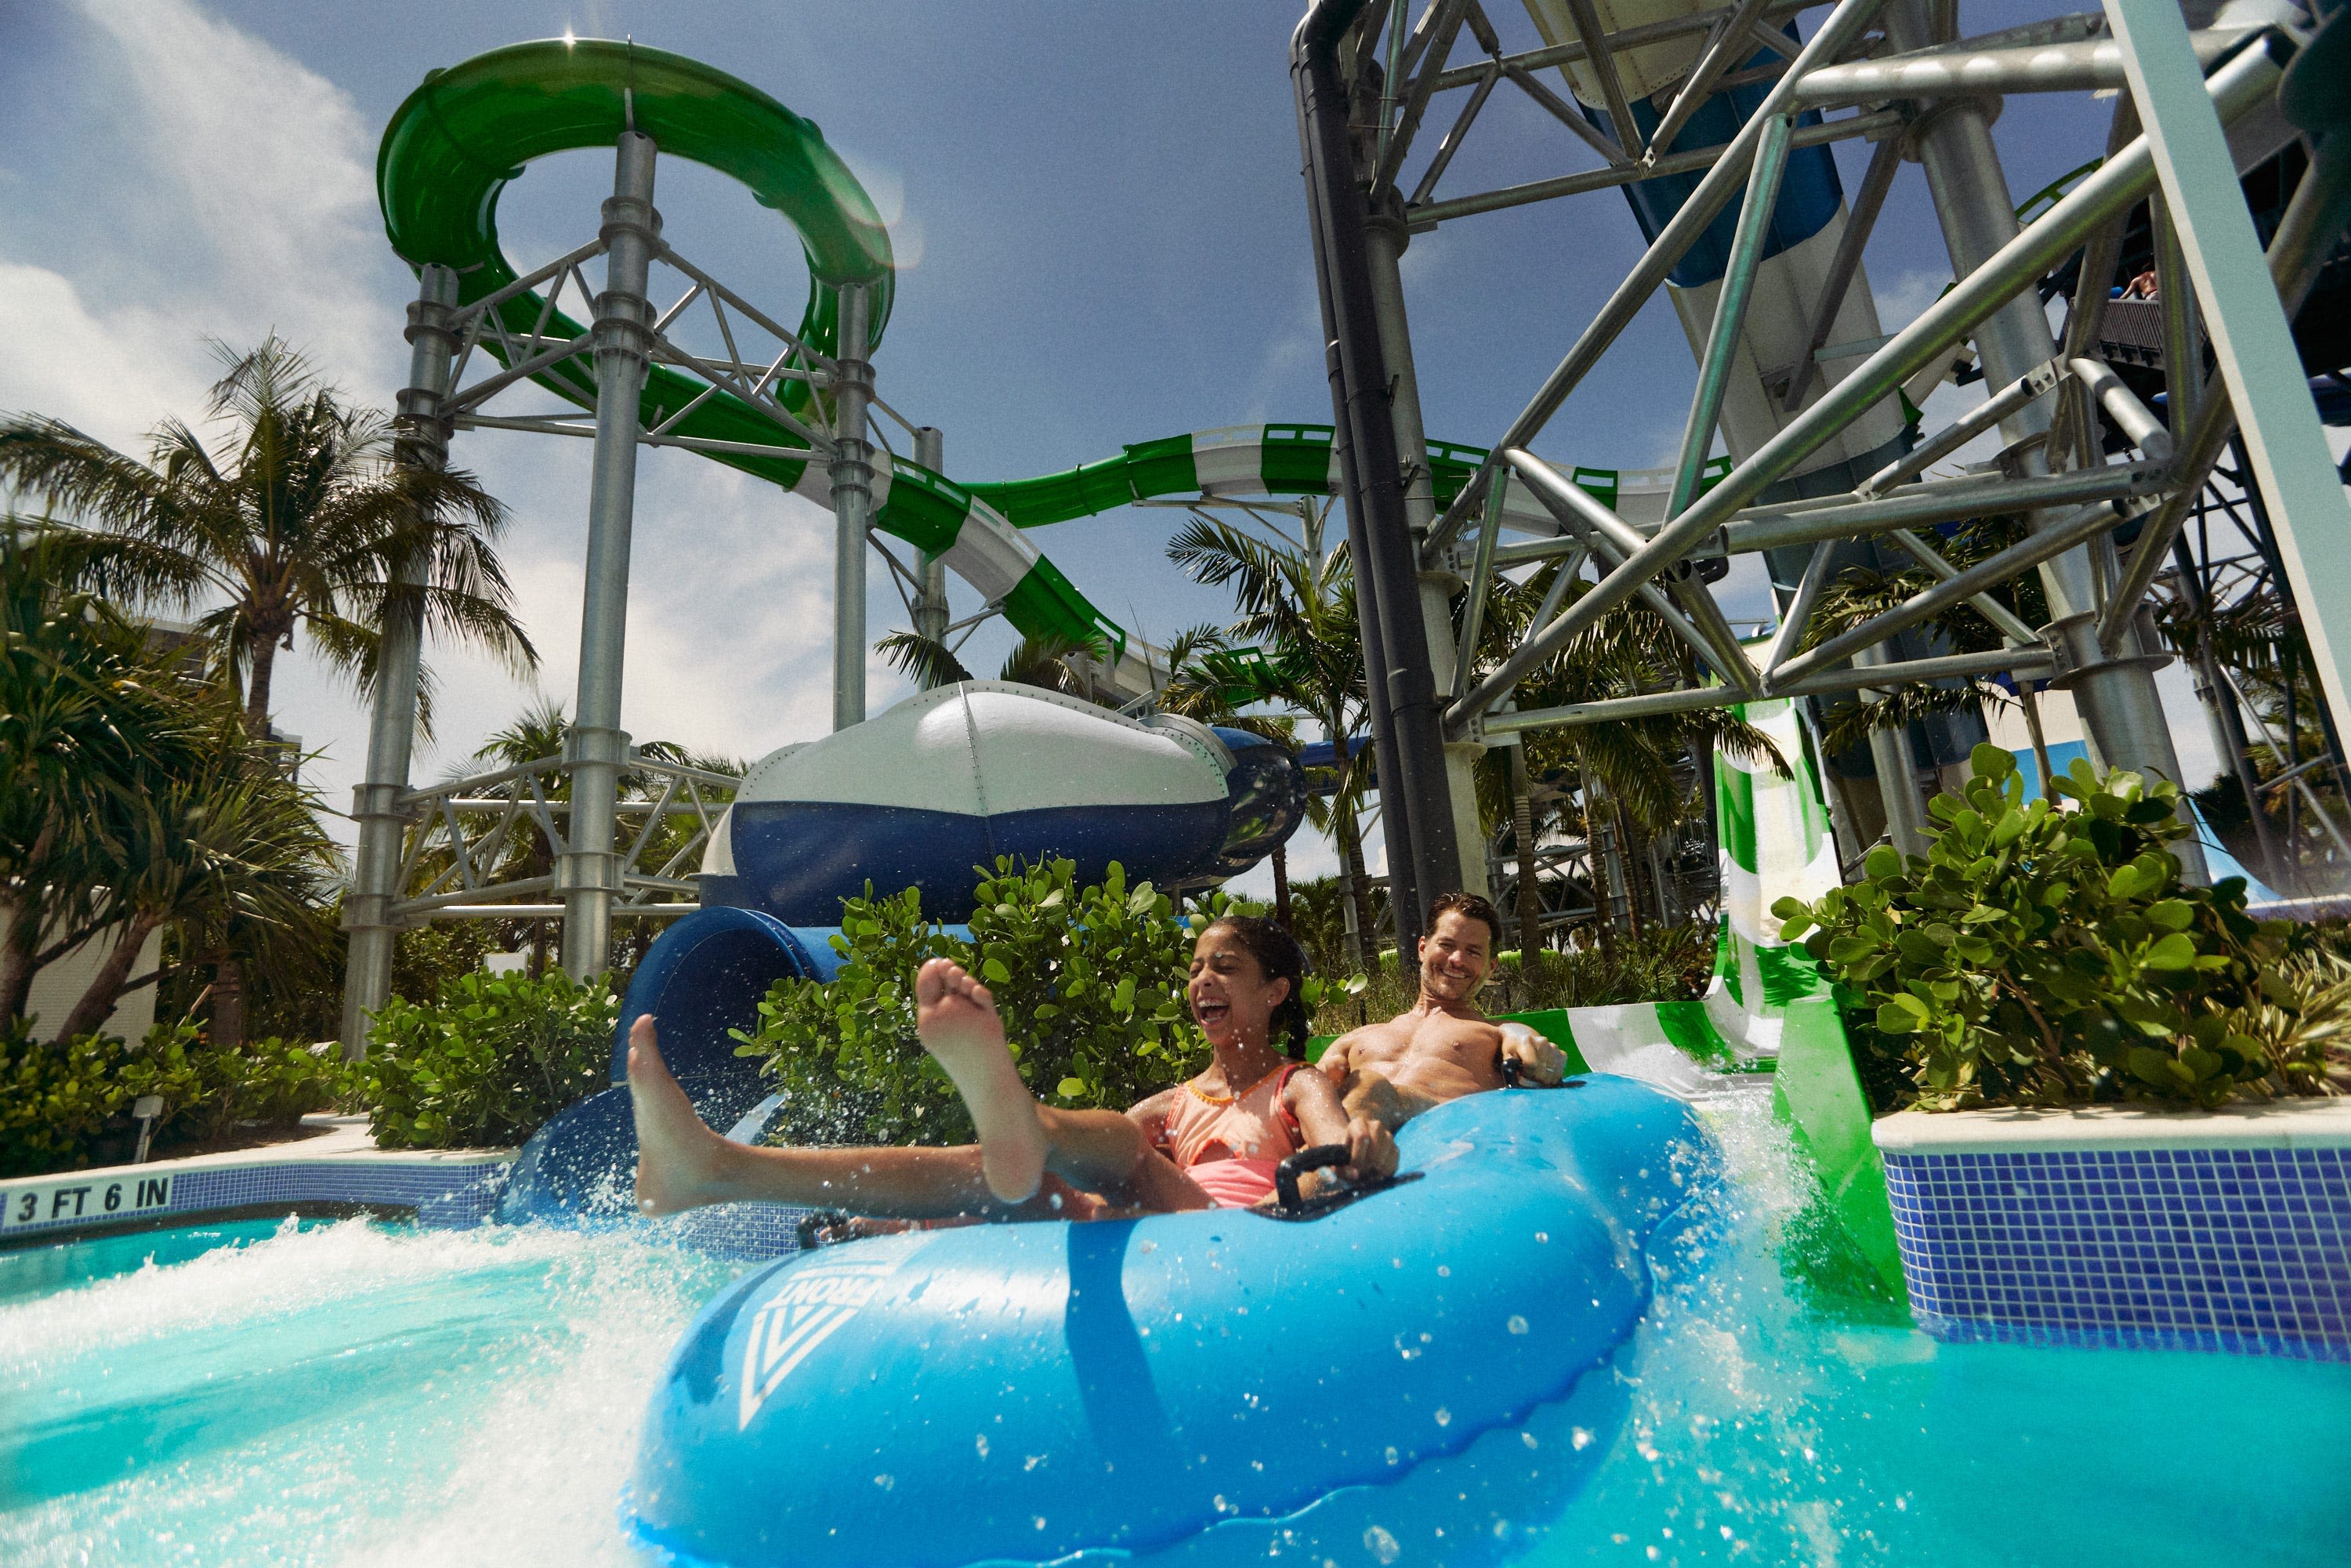 2 Florida waterparks ranked among best in the country for adults. Have you been to them?